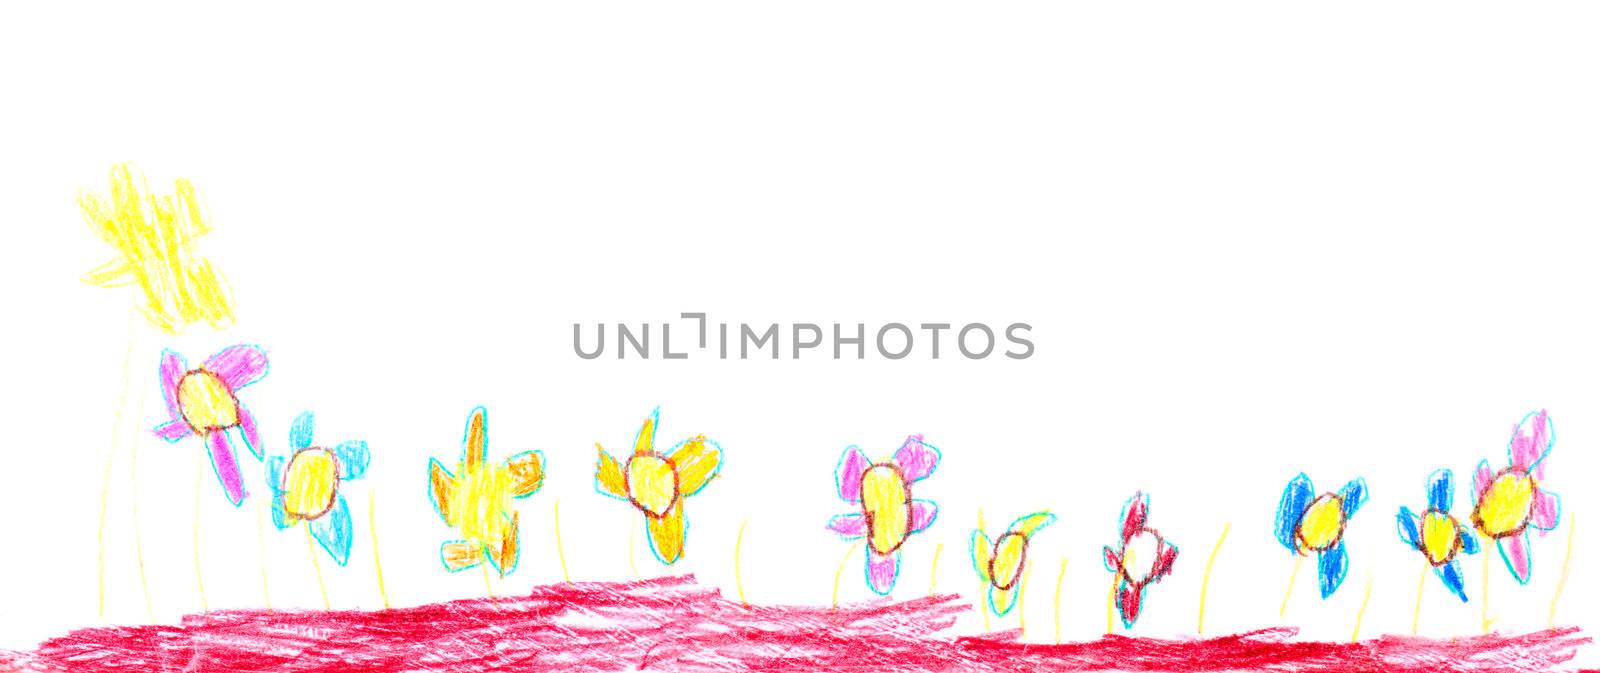 Children's drawing - colored flowers by aguirre_mar